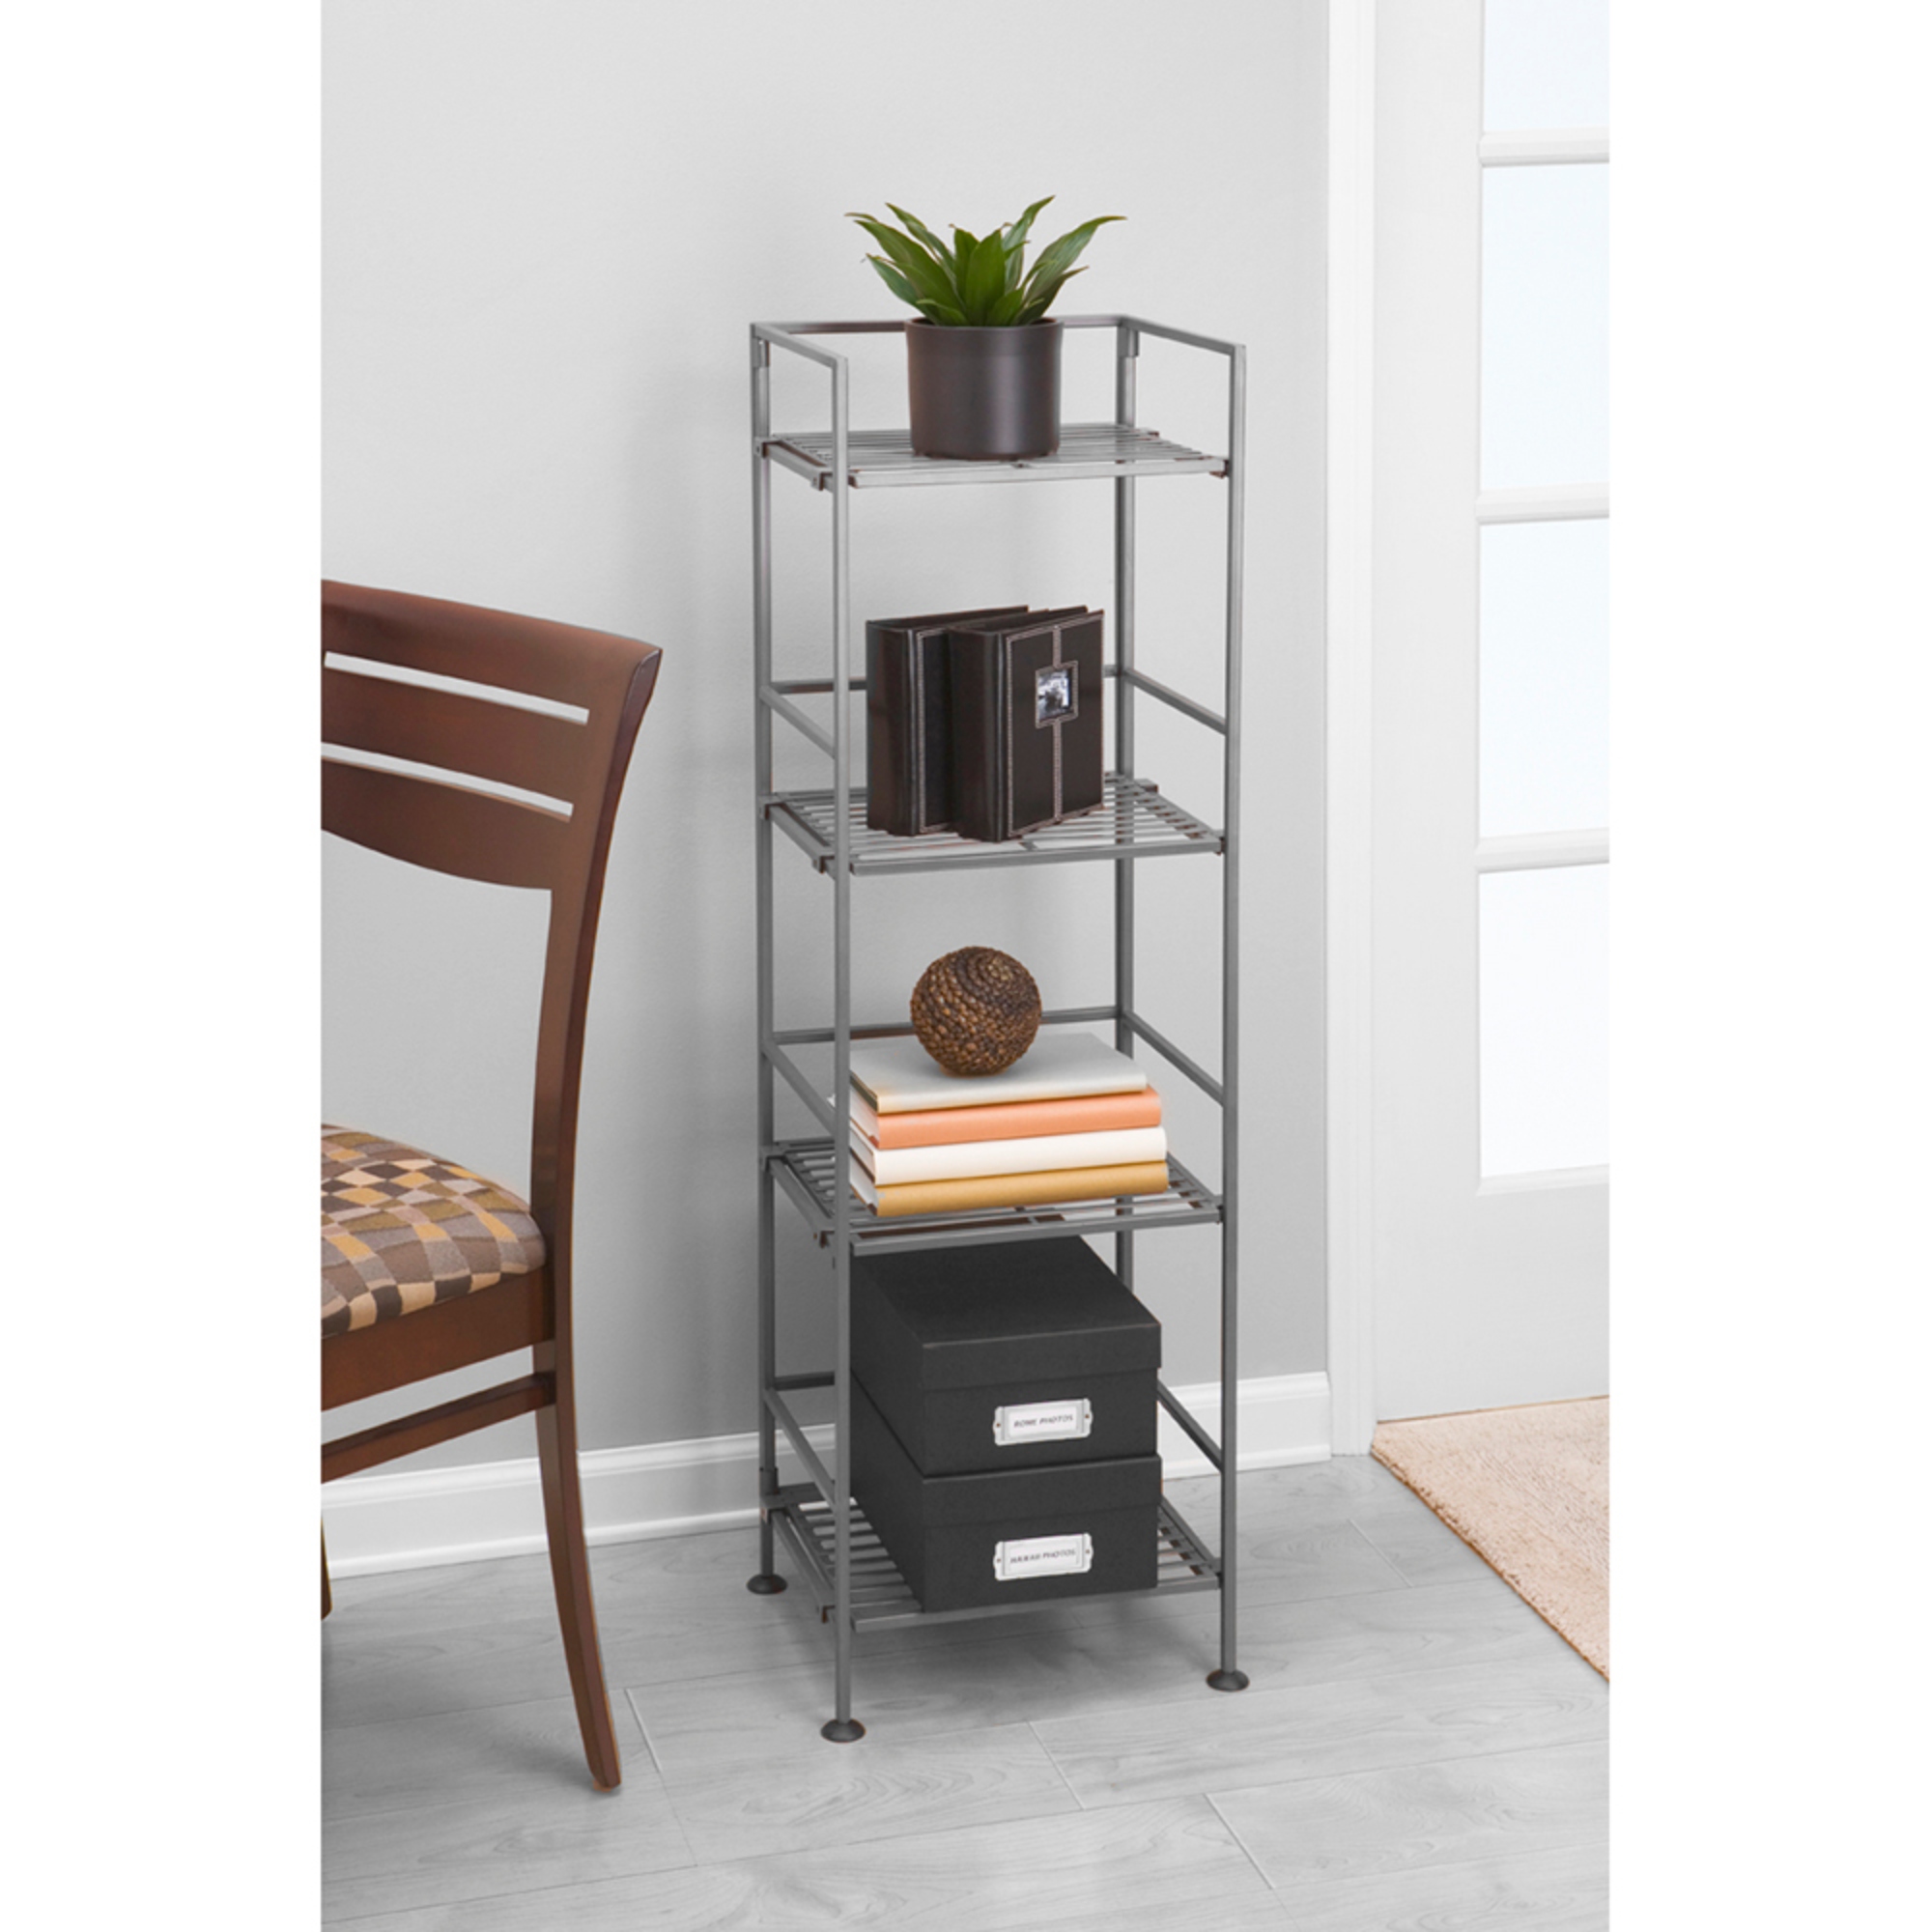 4-Tier Iron Tower Shelving, Pewter 11.3"D x 13"W x 44.3"H by Seville Classics - image 3 of 8